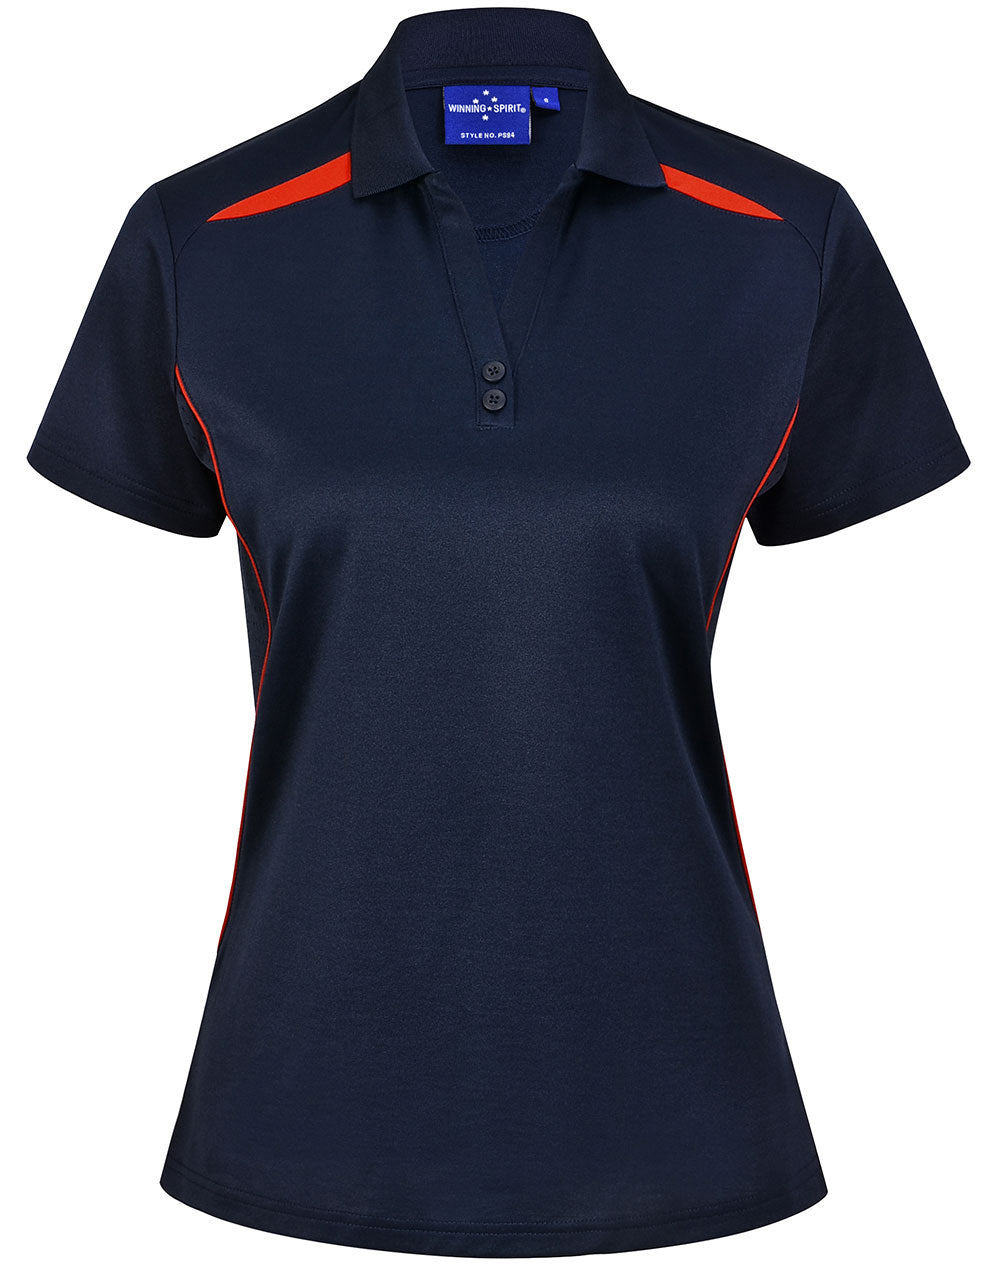 Women's Sustainable Poly/Cotton Contrast Polo Shirt PS94 Casual Wear Winning Spirit Navy/Red 6 